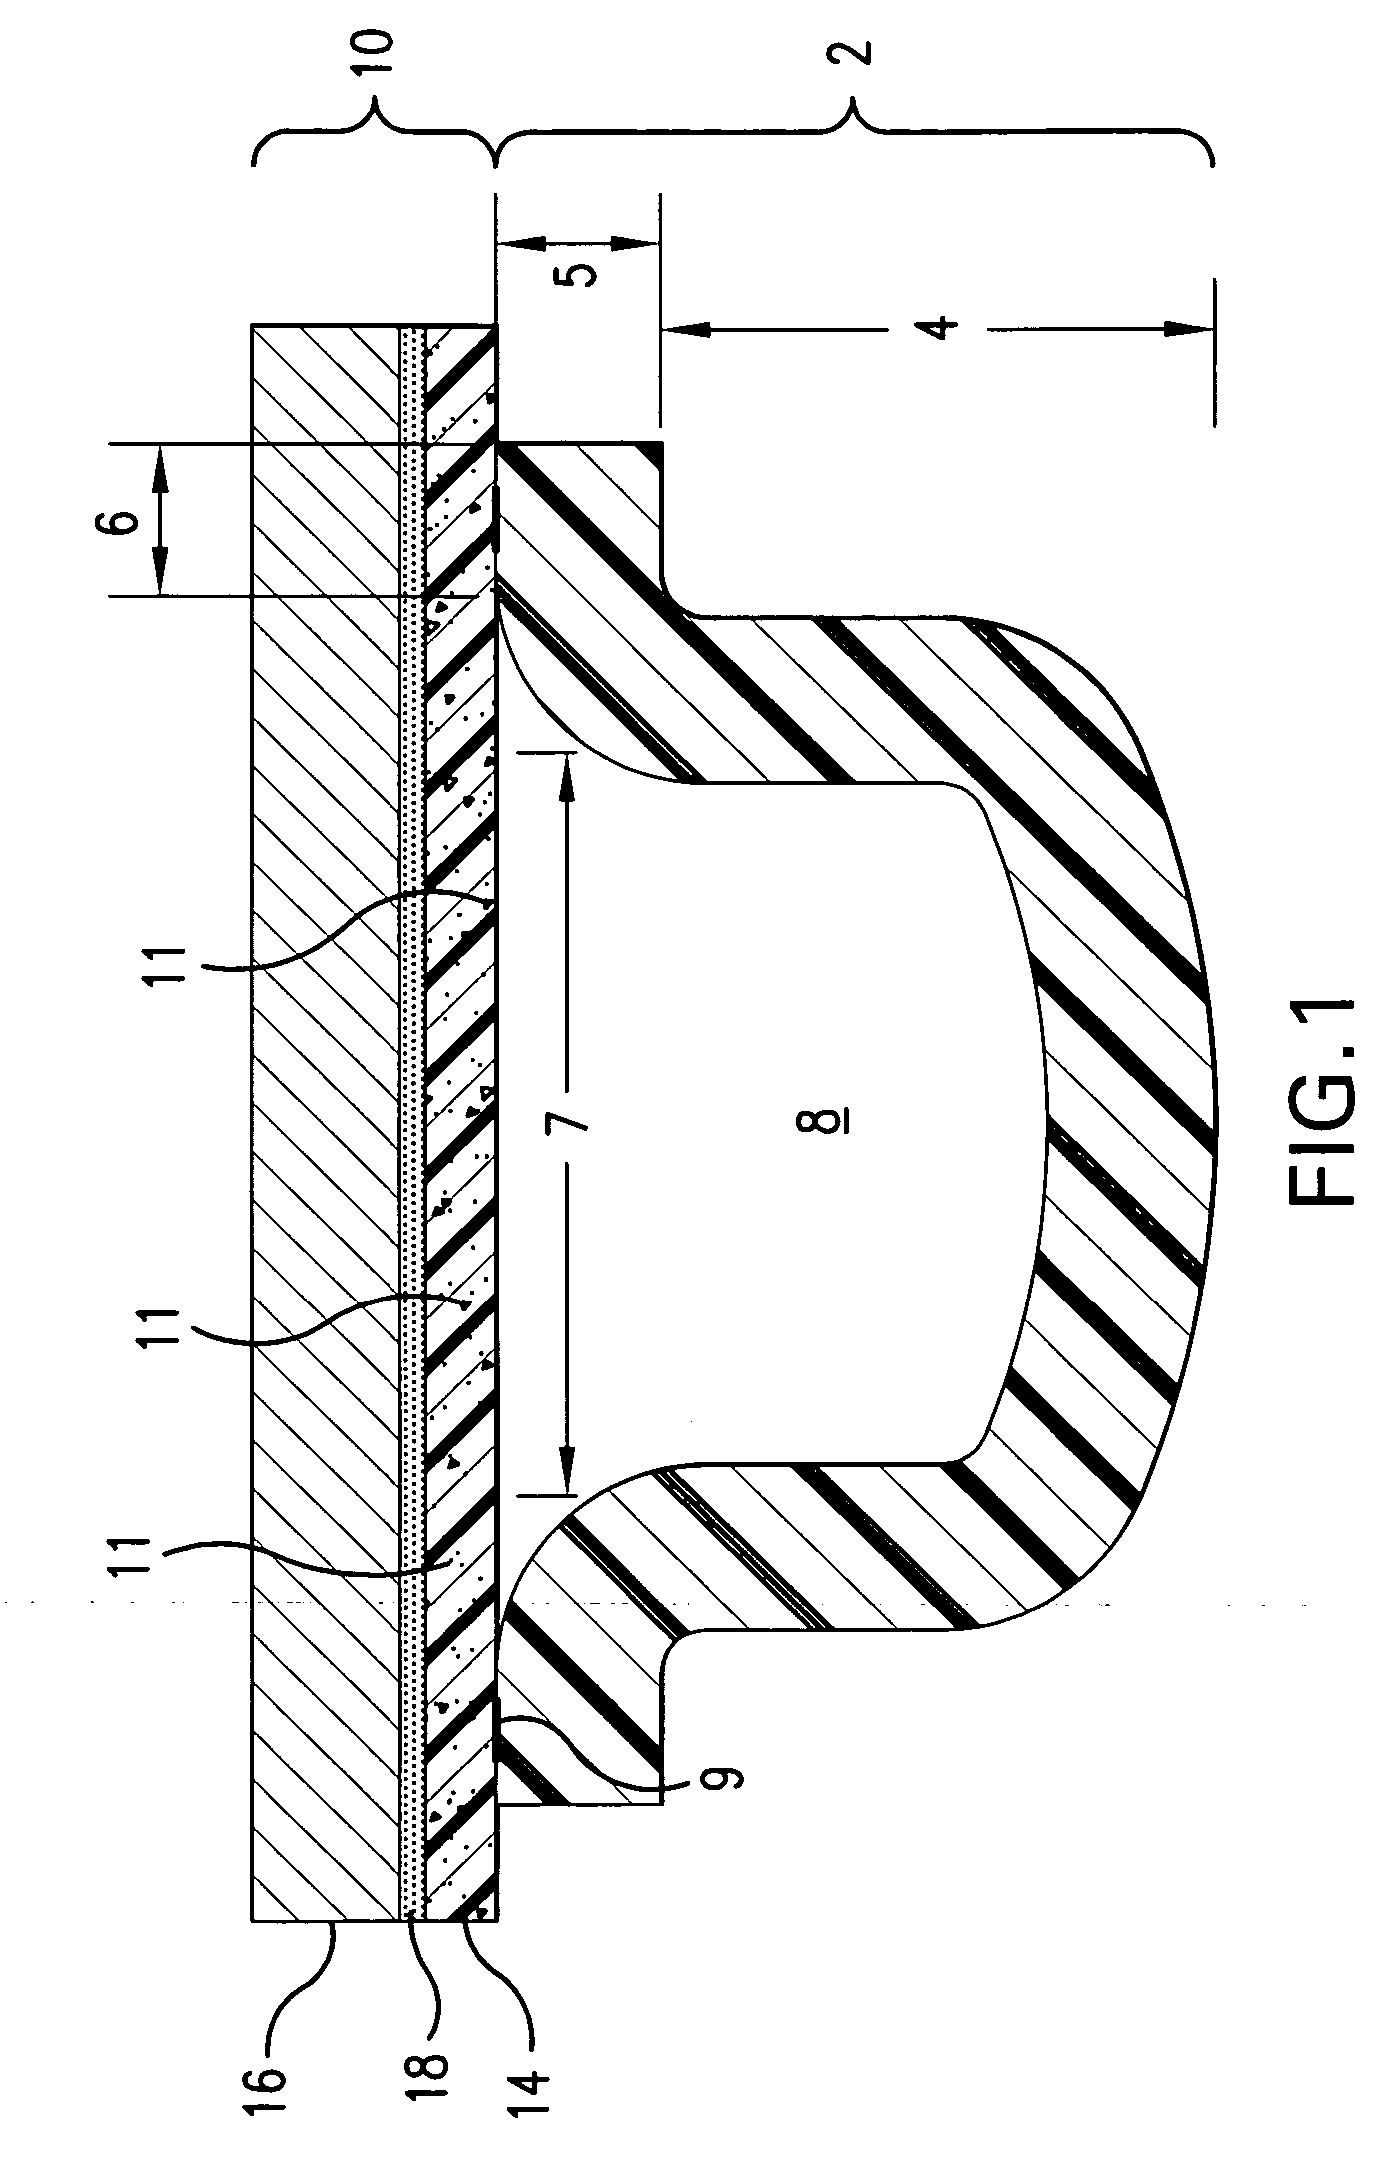 Peelable breakaway multi-layered structures and methods and compositions for making such structures